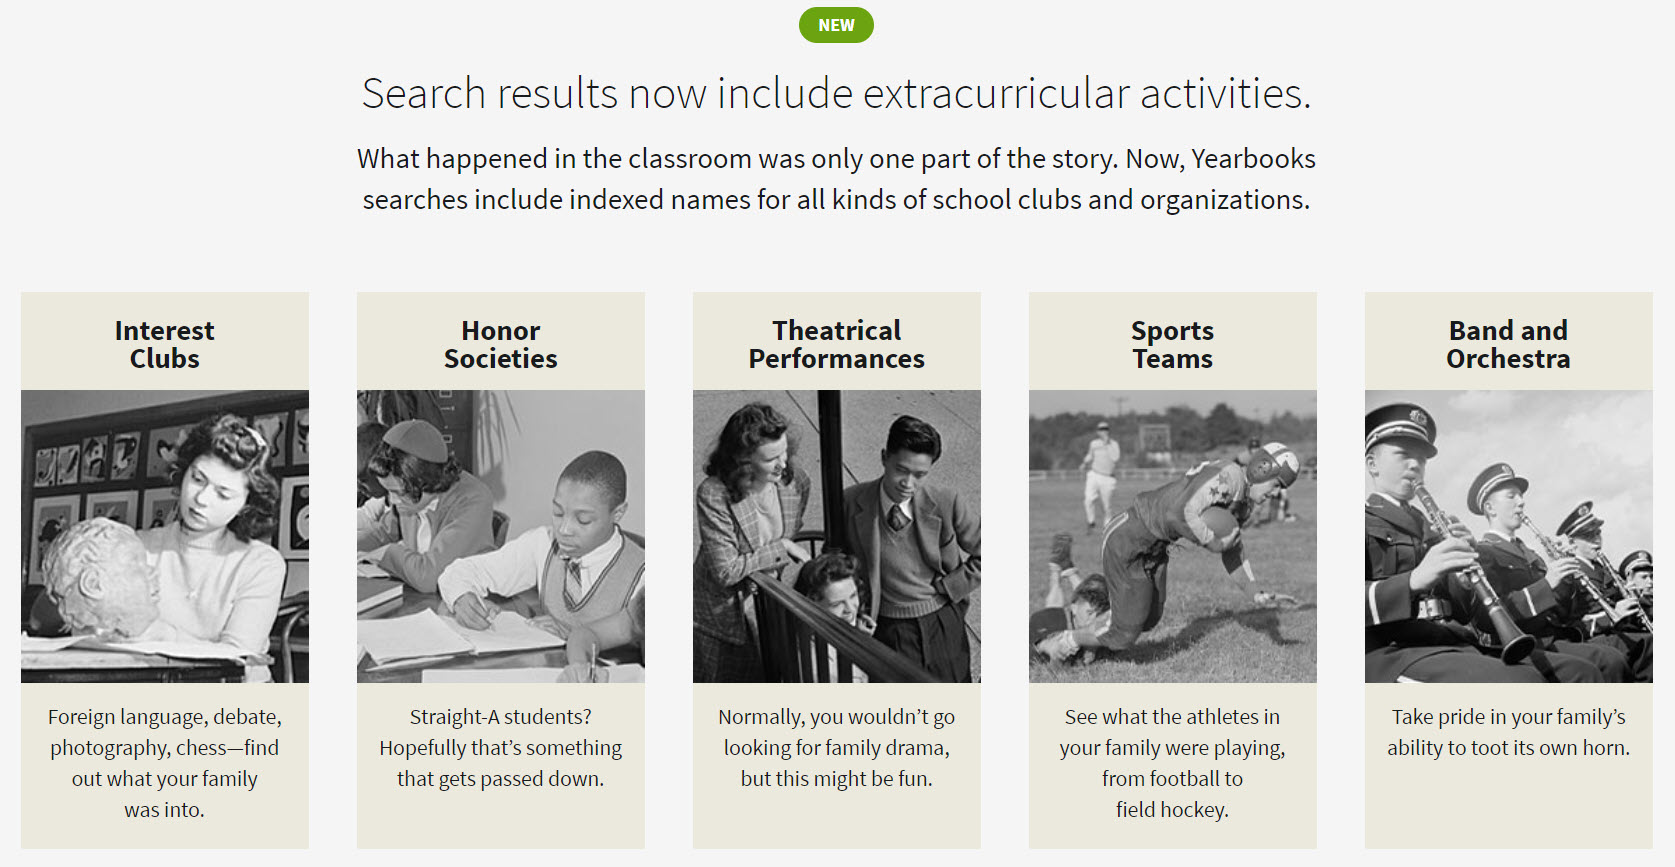 Ancestry Yearbook Records Now Include Extracurricular Activities